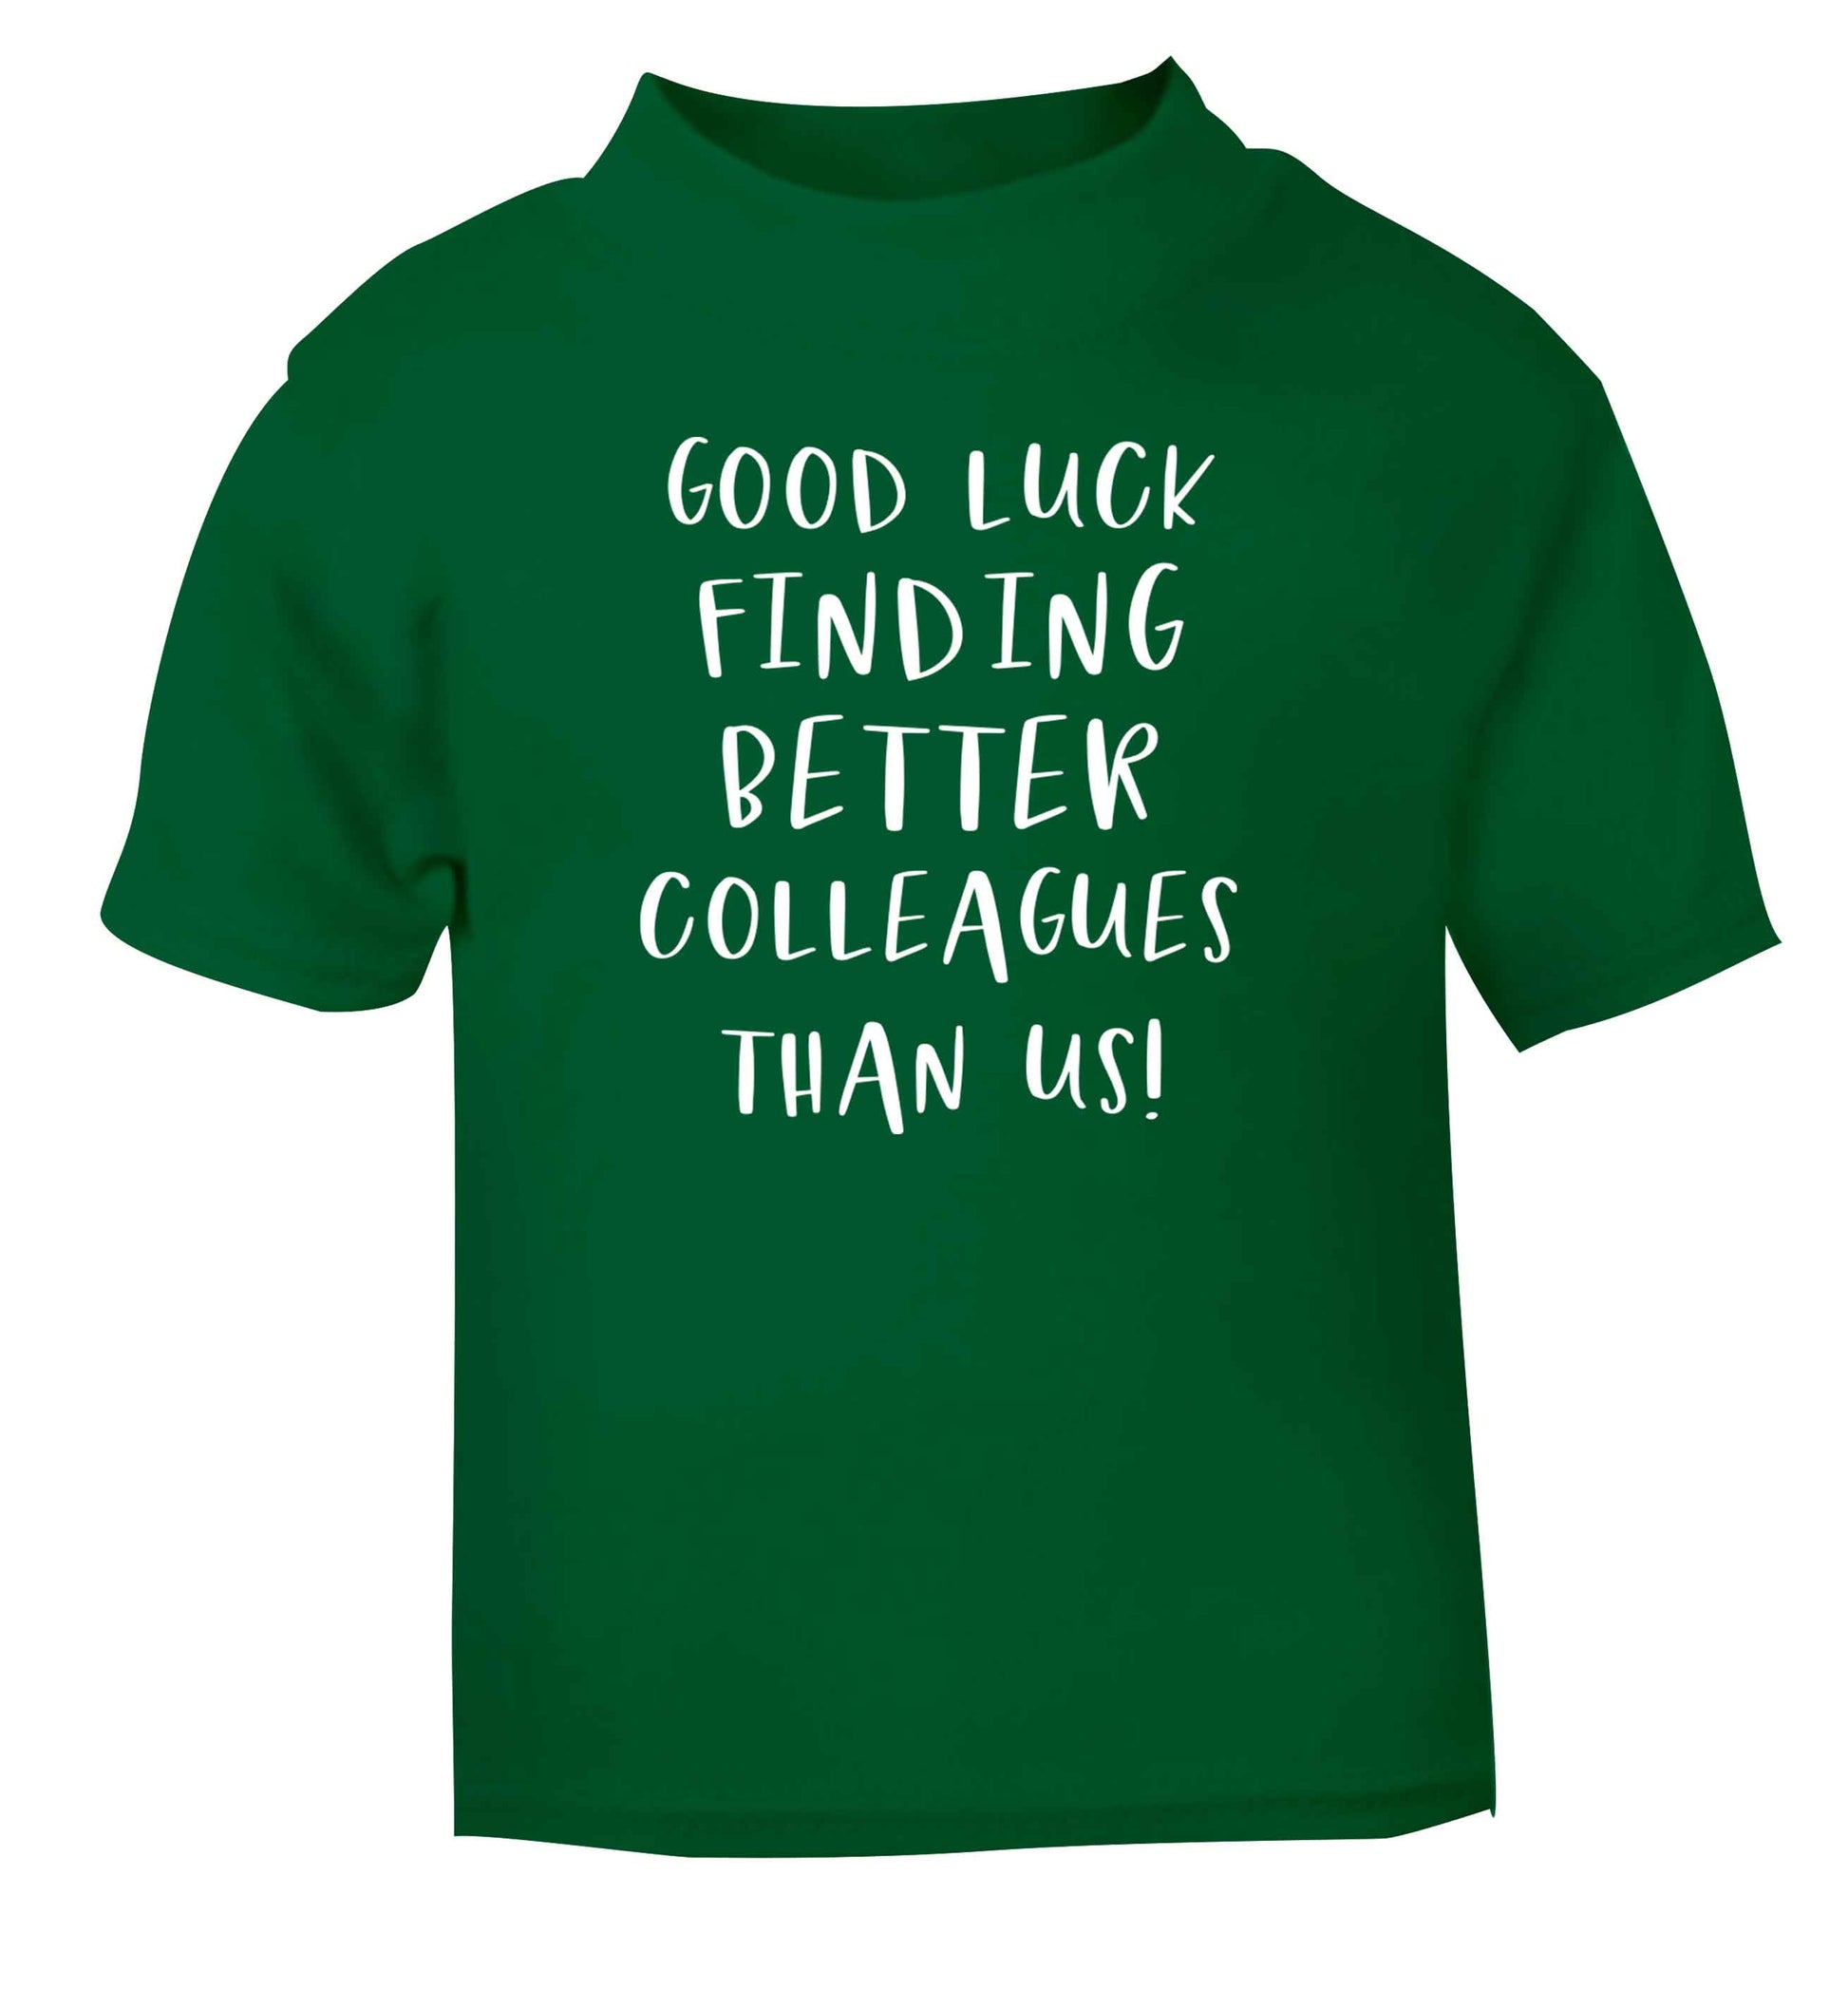 Good luck finding better colleagues than us! green Baby Toddler Tshirt 2 Years